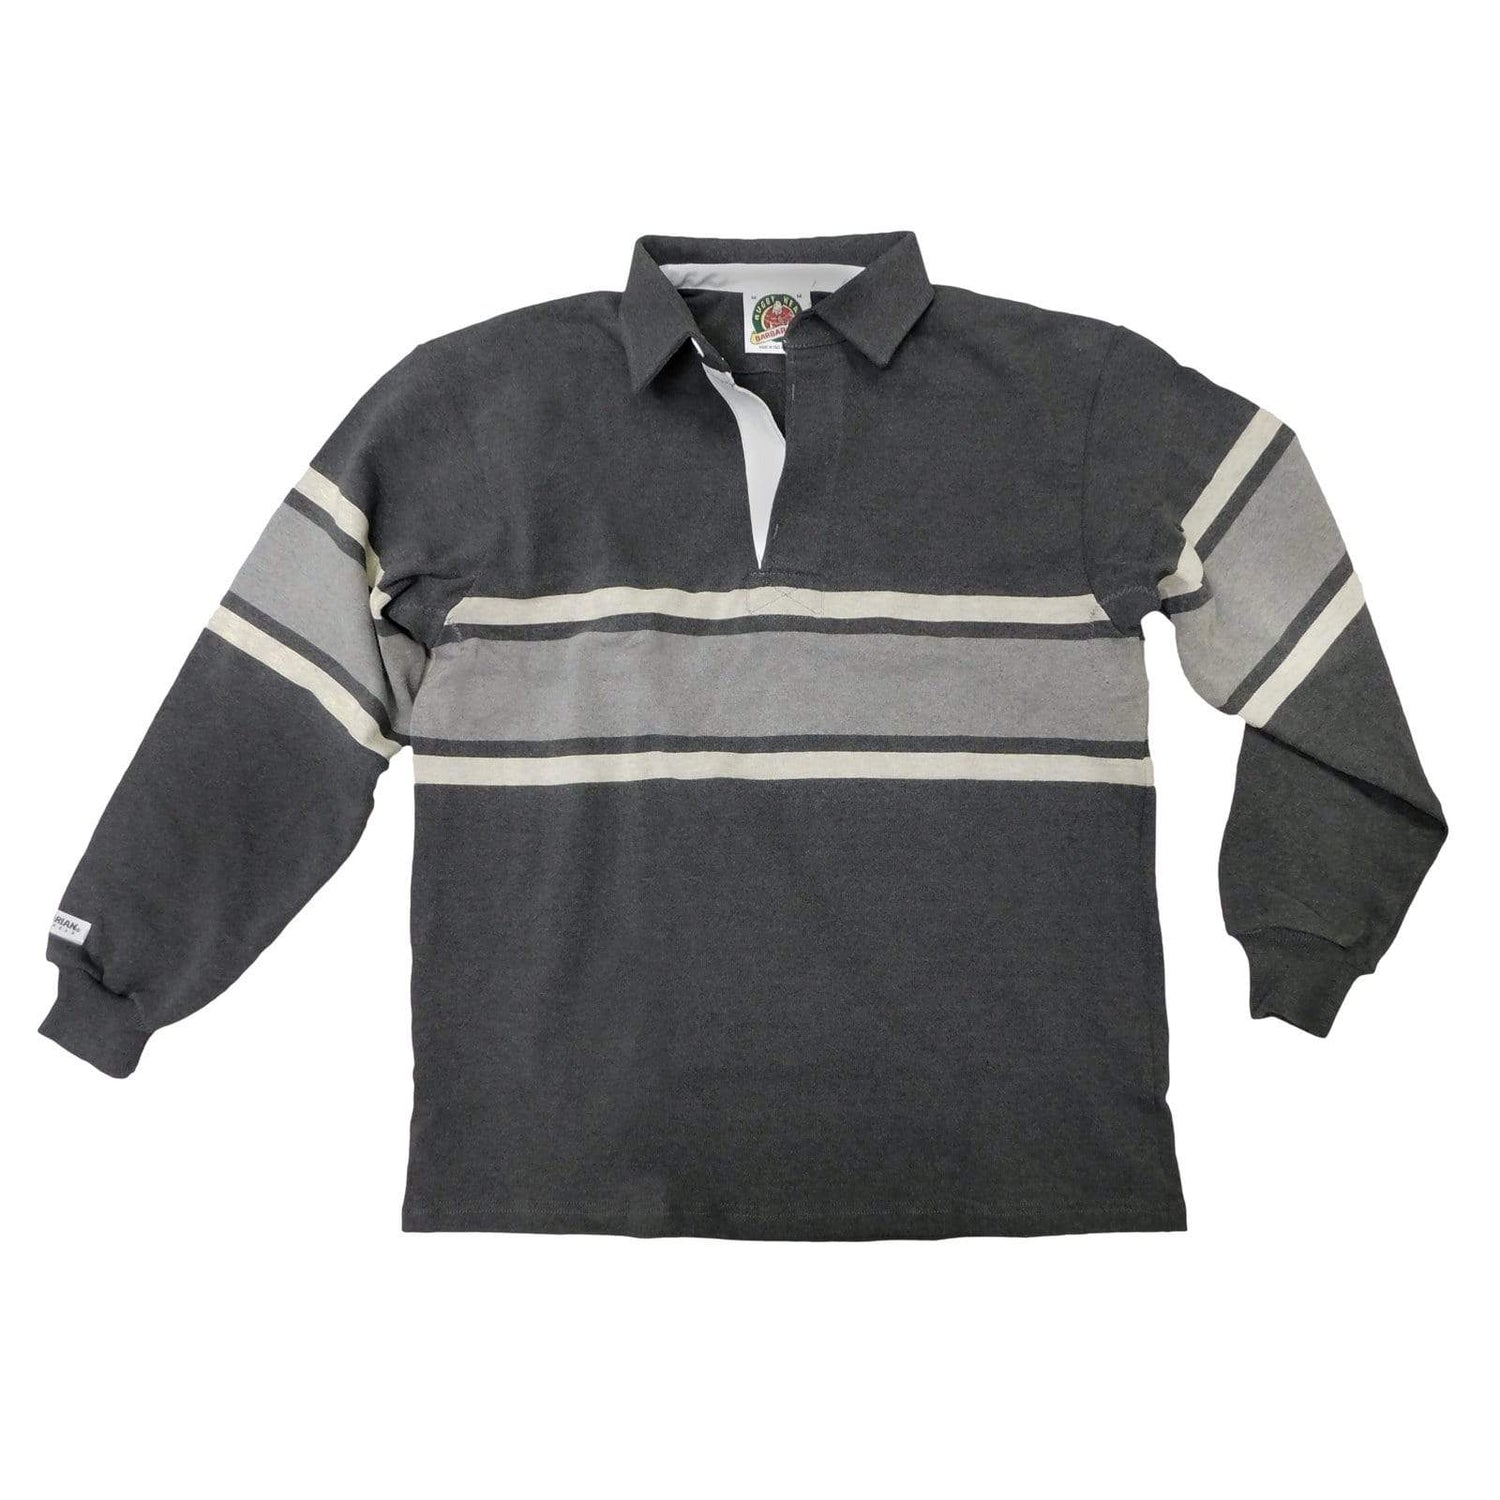 Barbarian Traditional Acadia Stripe Rugby Jersey | RugbyImports.com